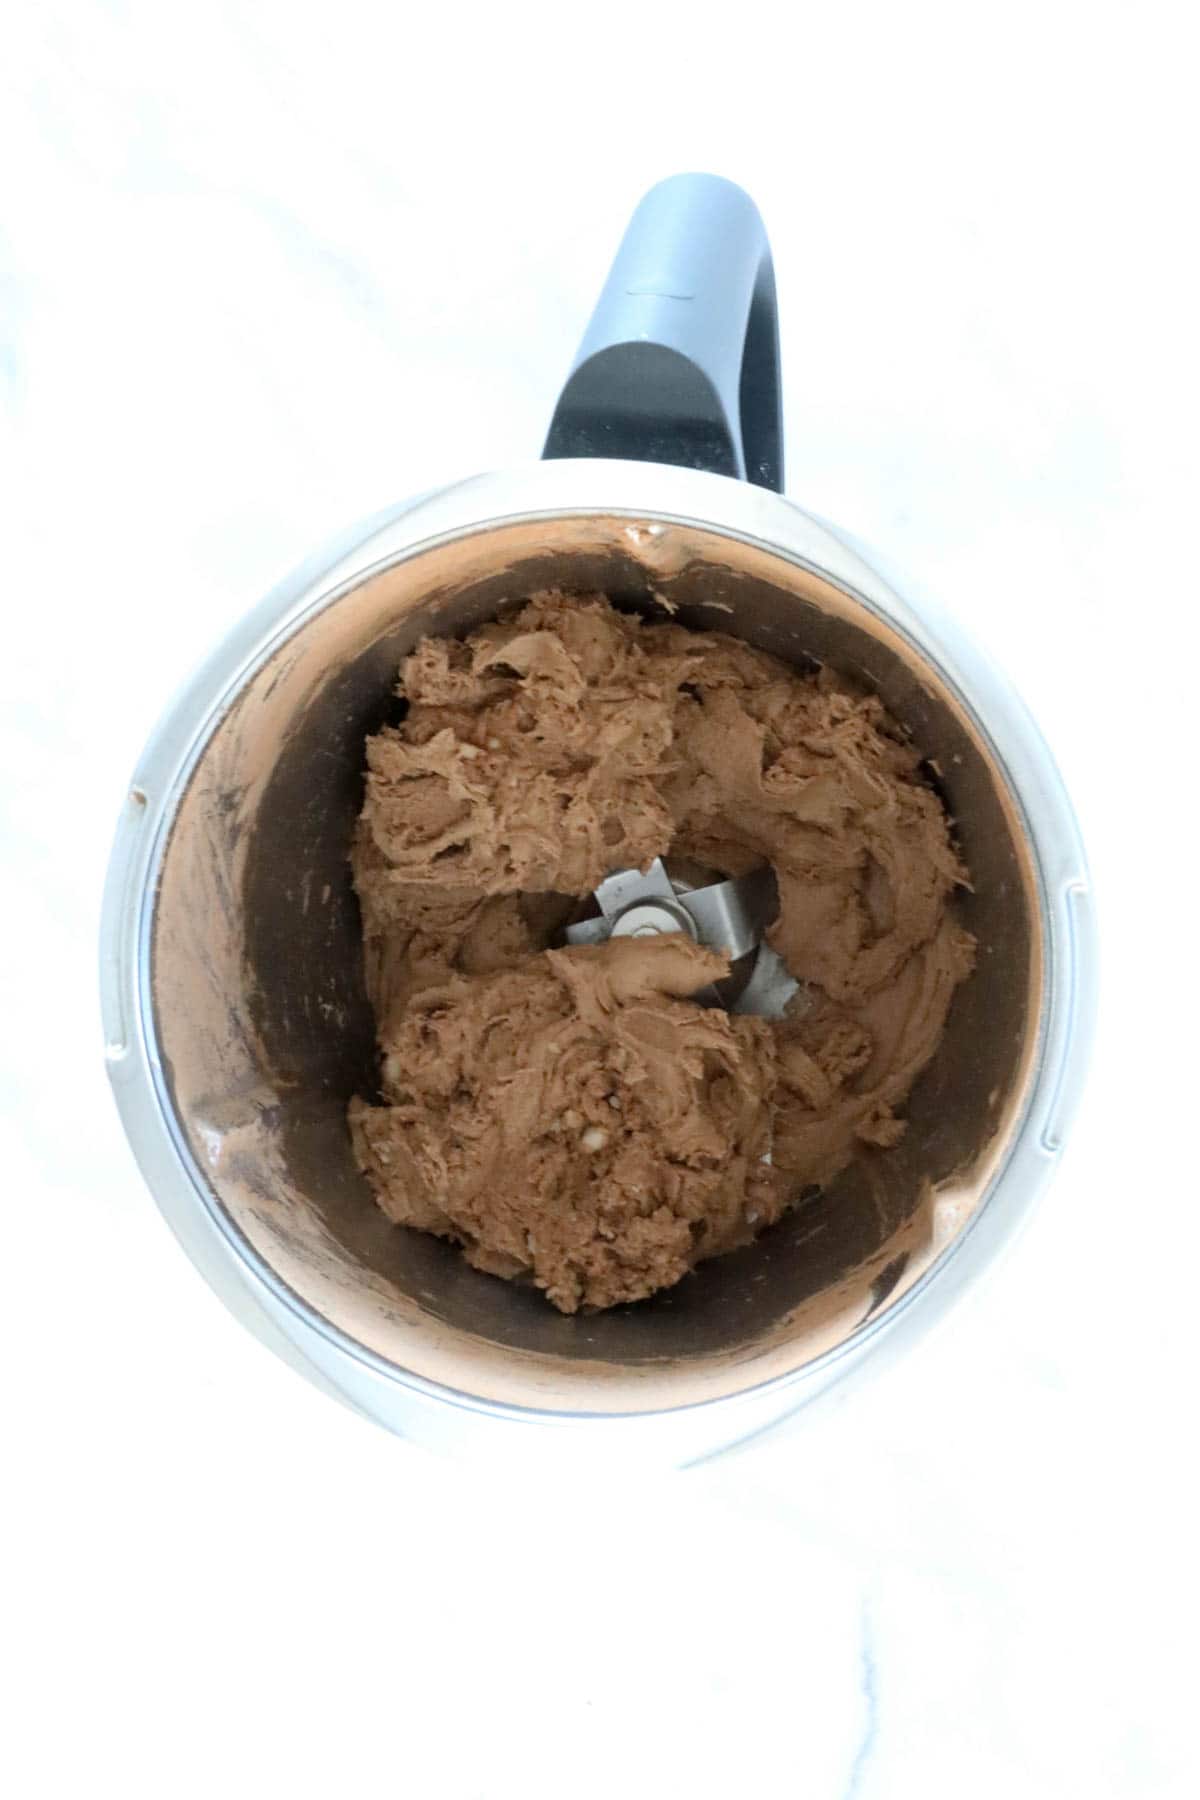 Chocolate ice cream being made in a Thermomix.